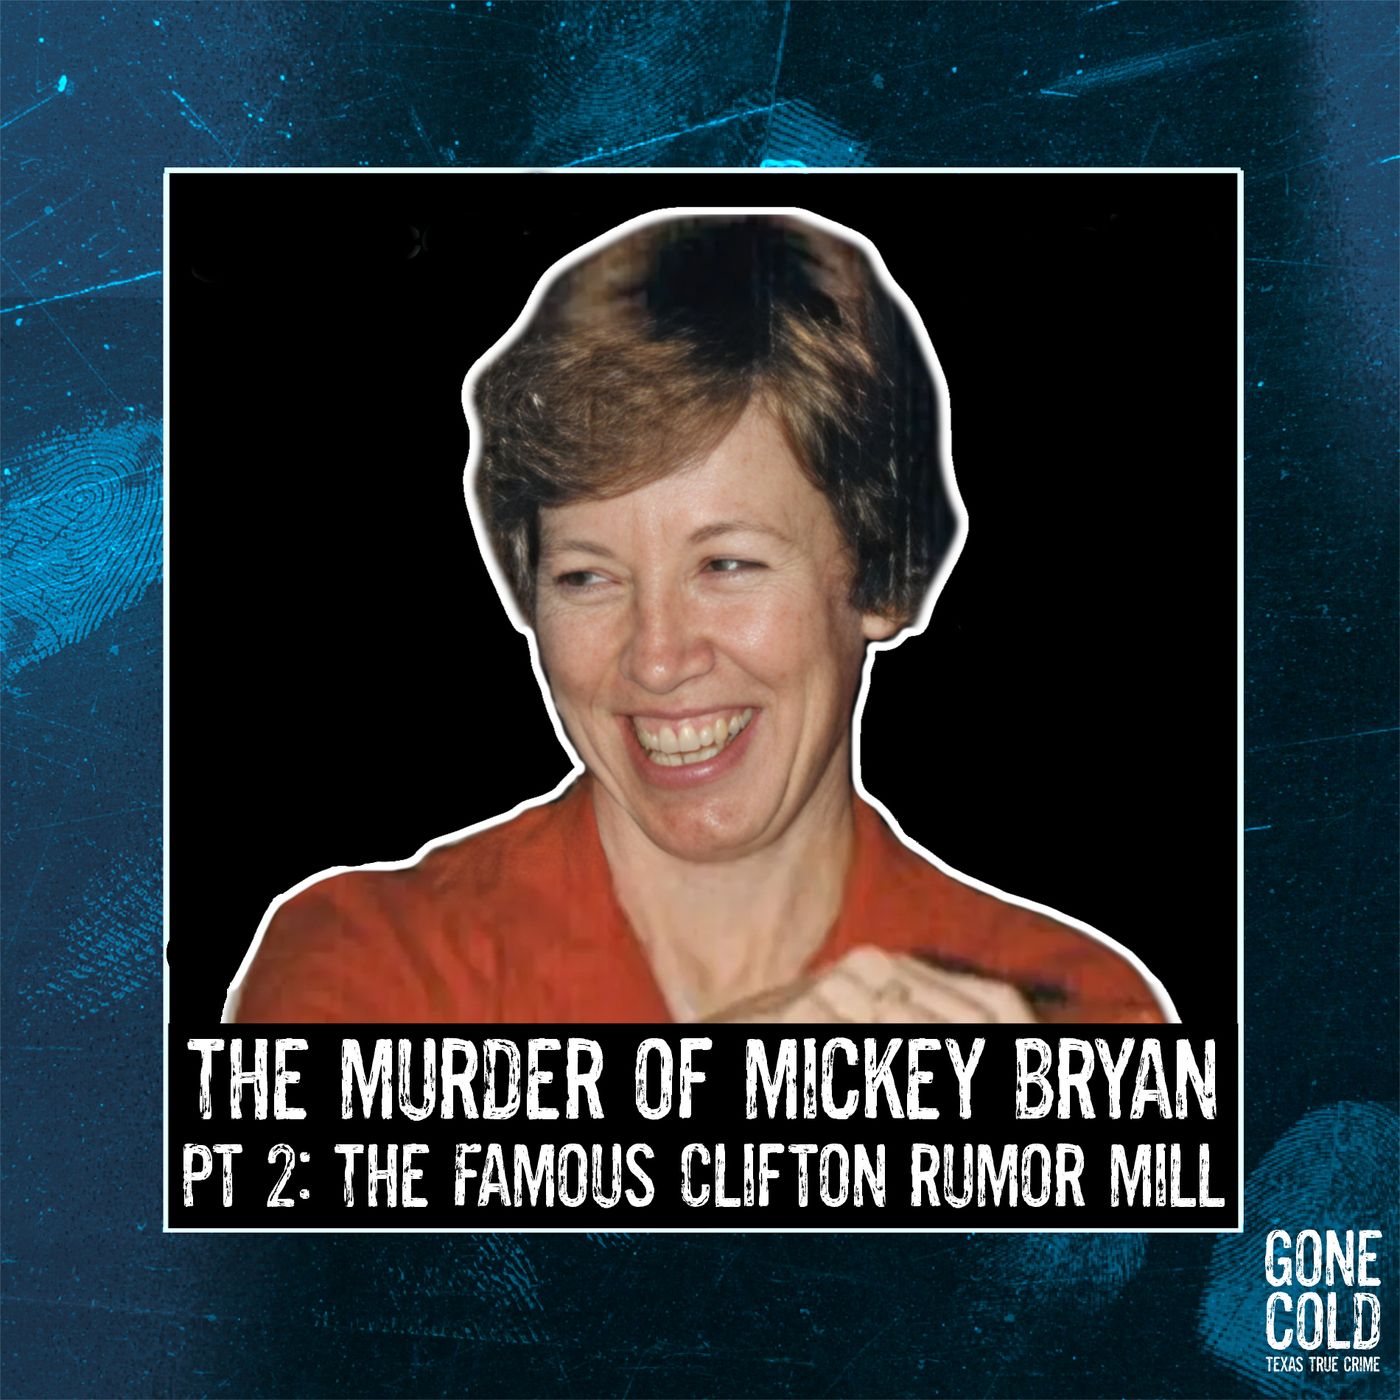 The Murder of Mickey Bryan Part 2: The Famous Clifton Rumor Mill